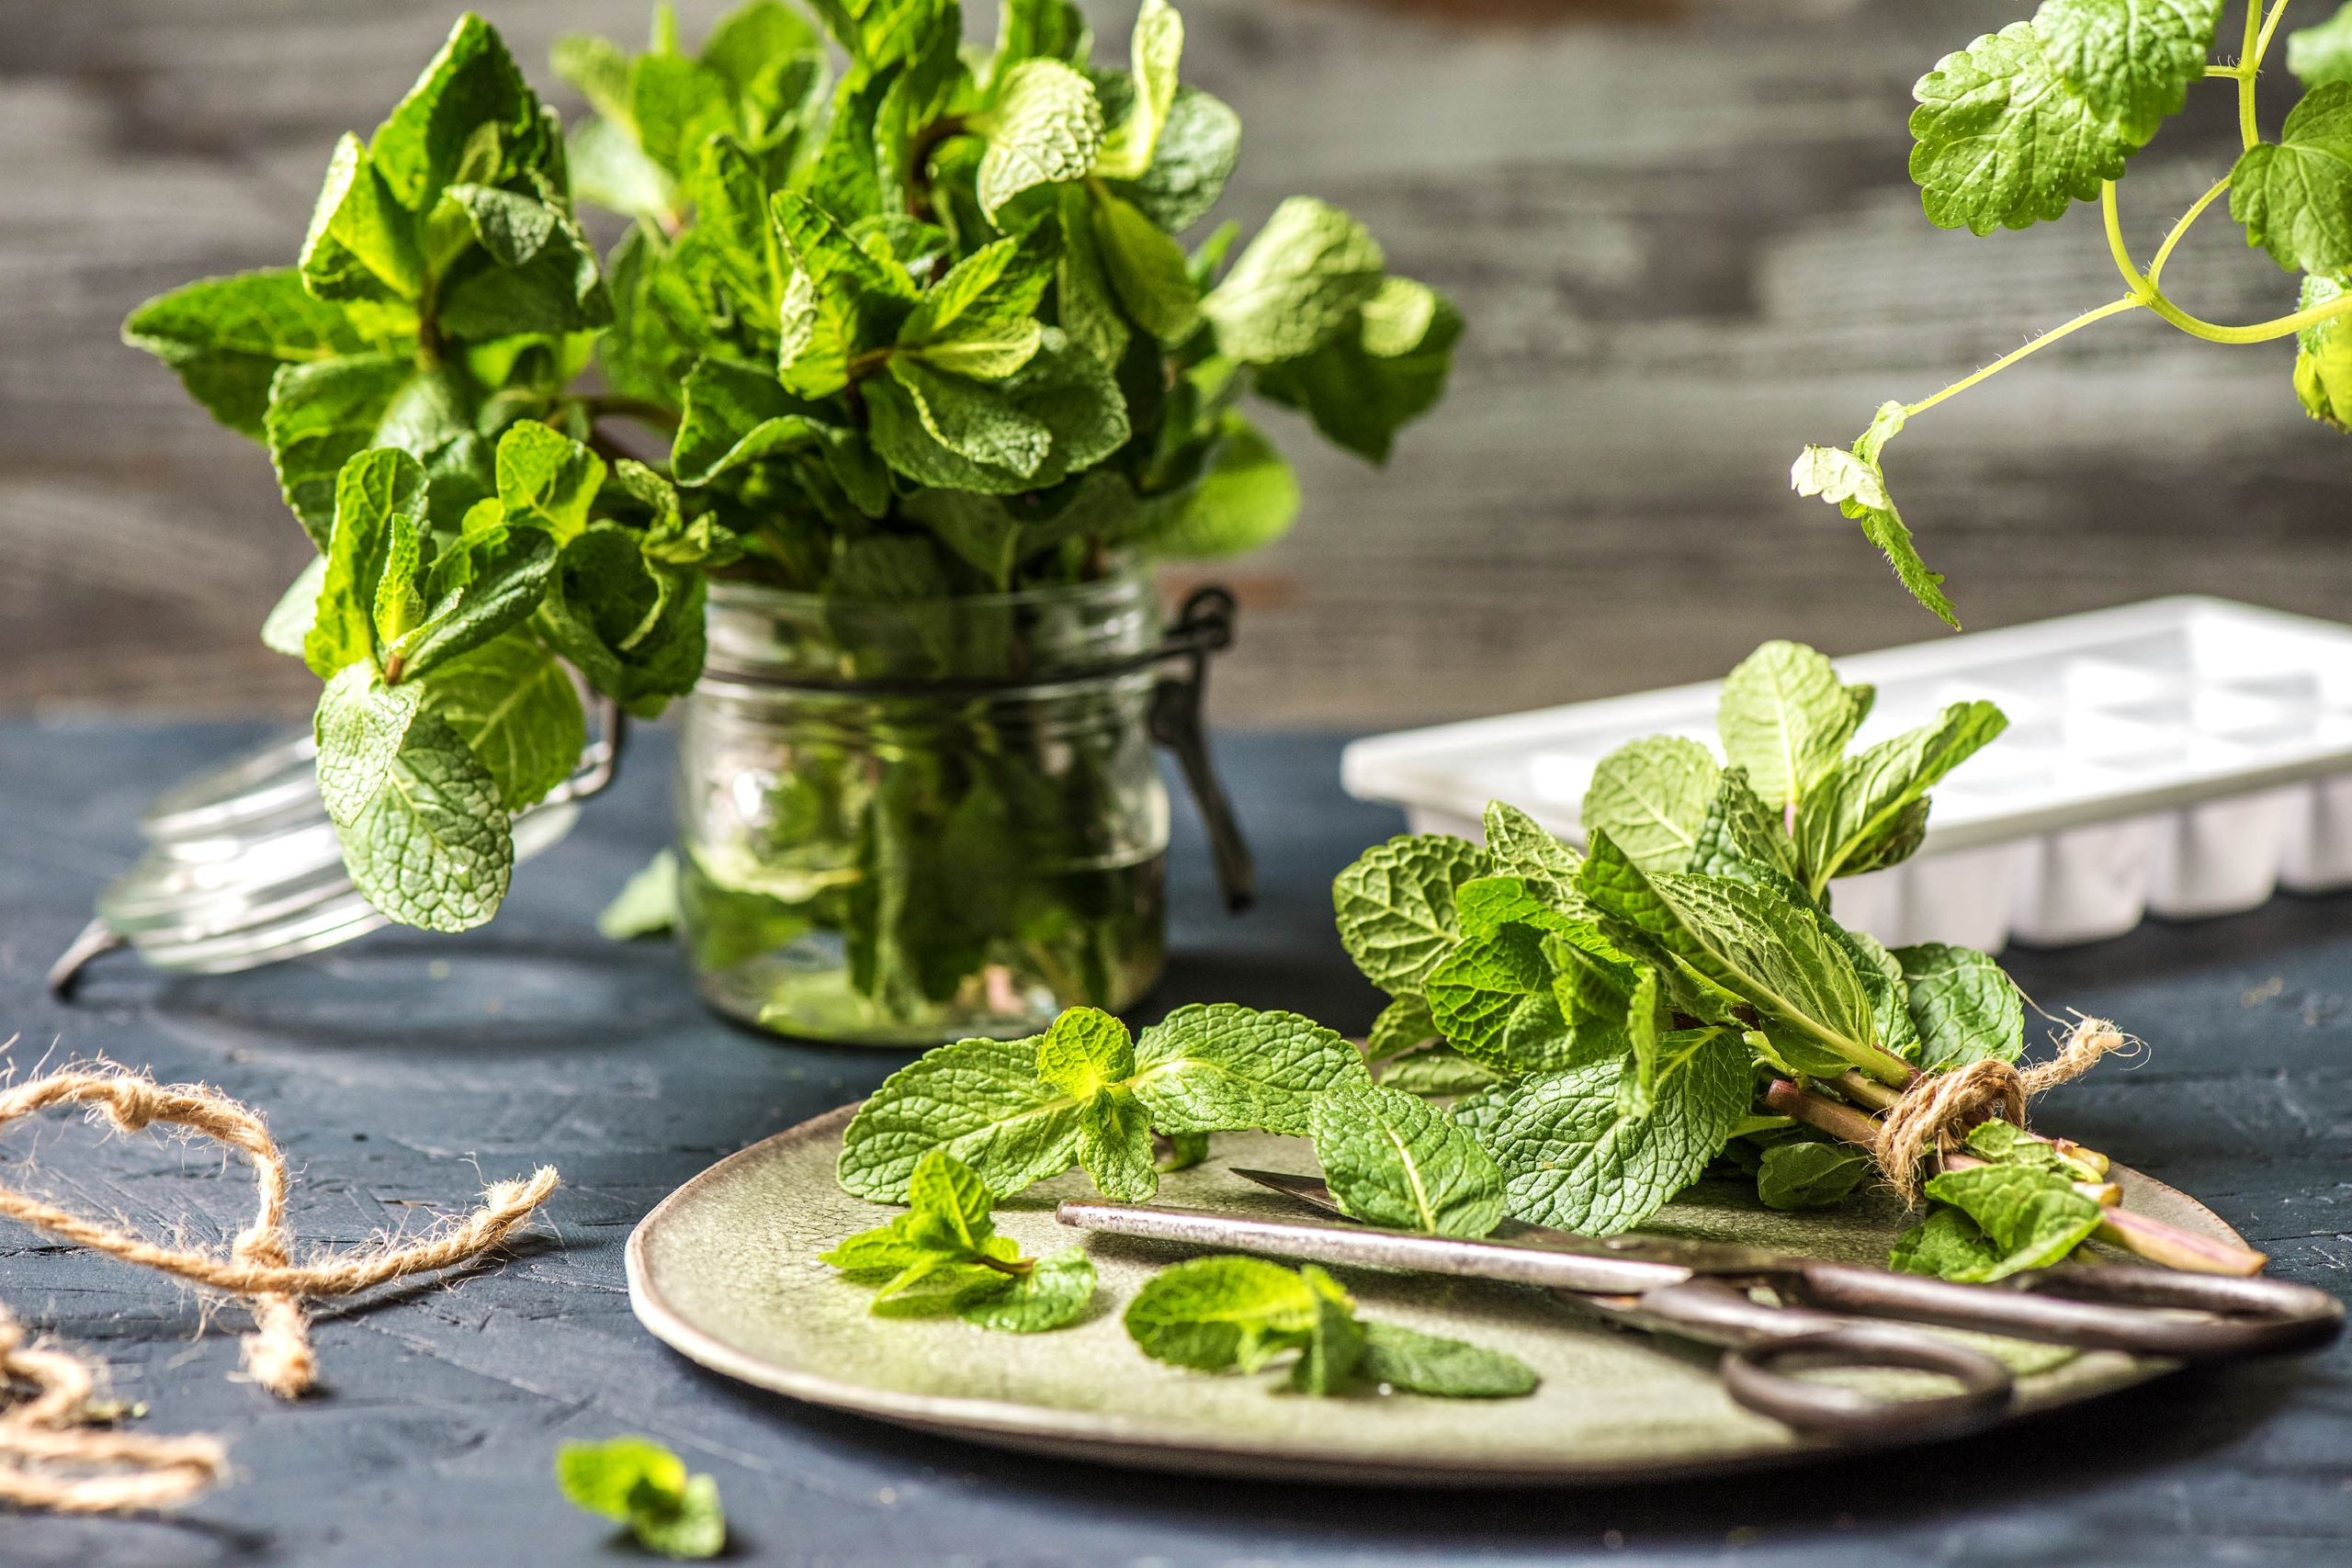  How to Store Fresh Herbs So They Last Longer